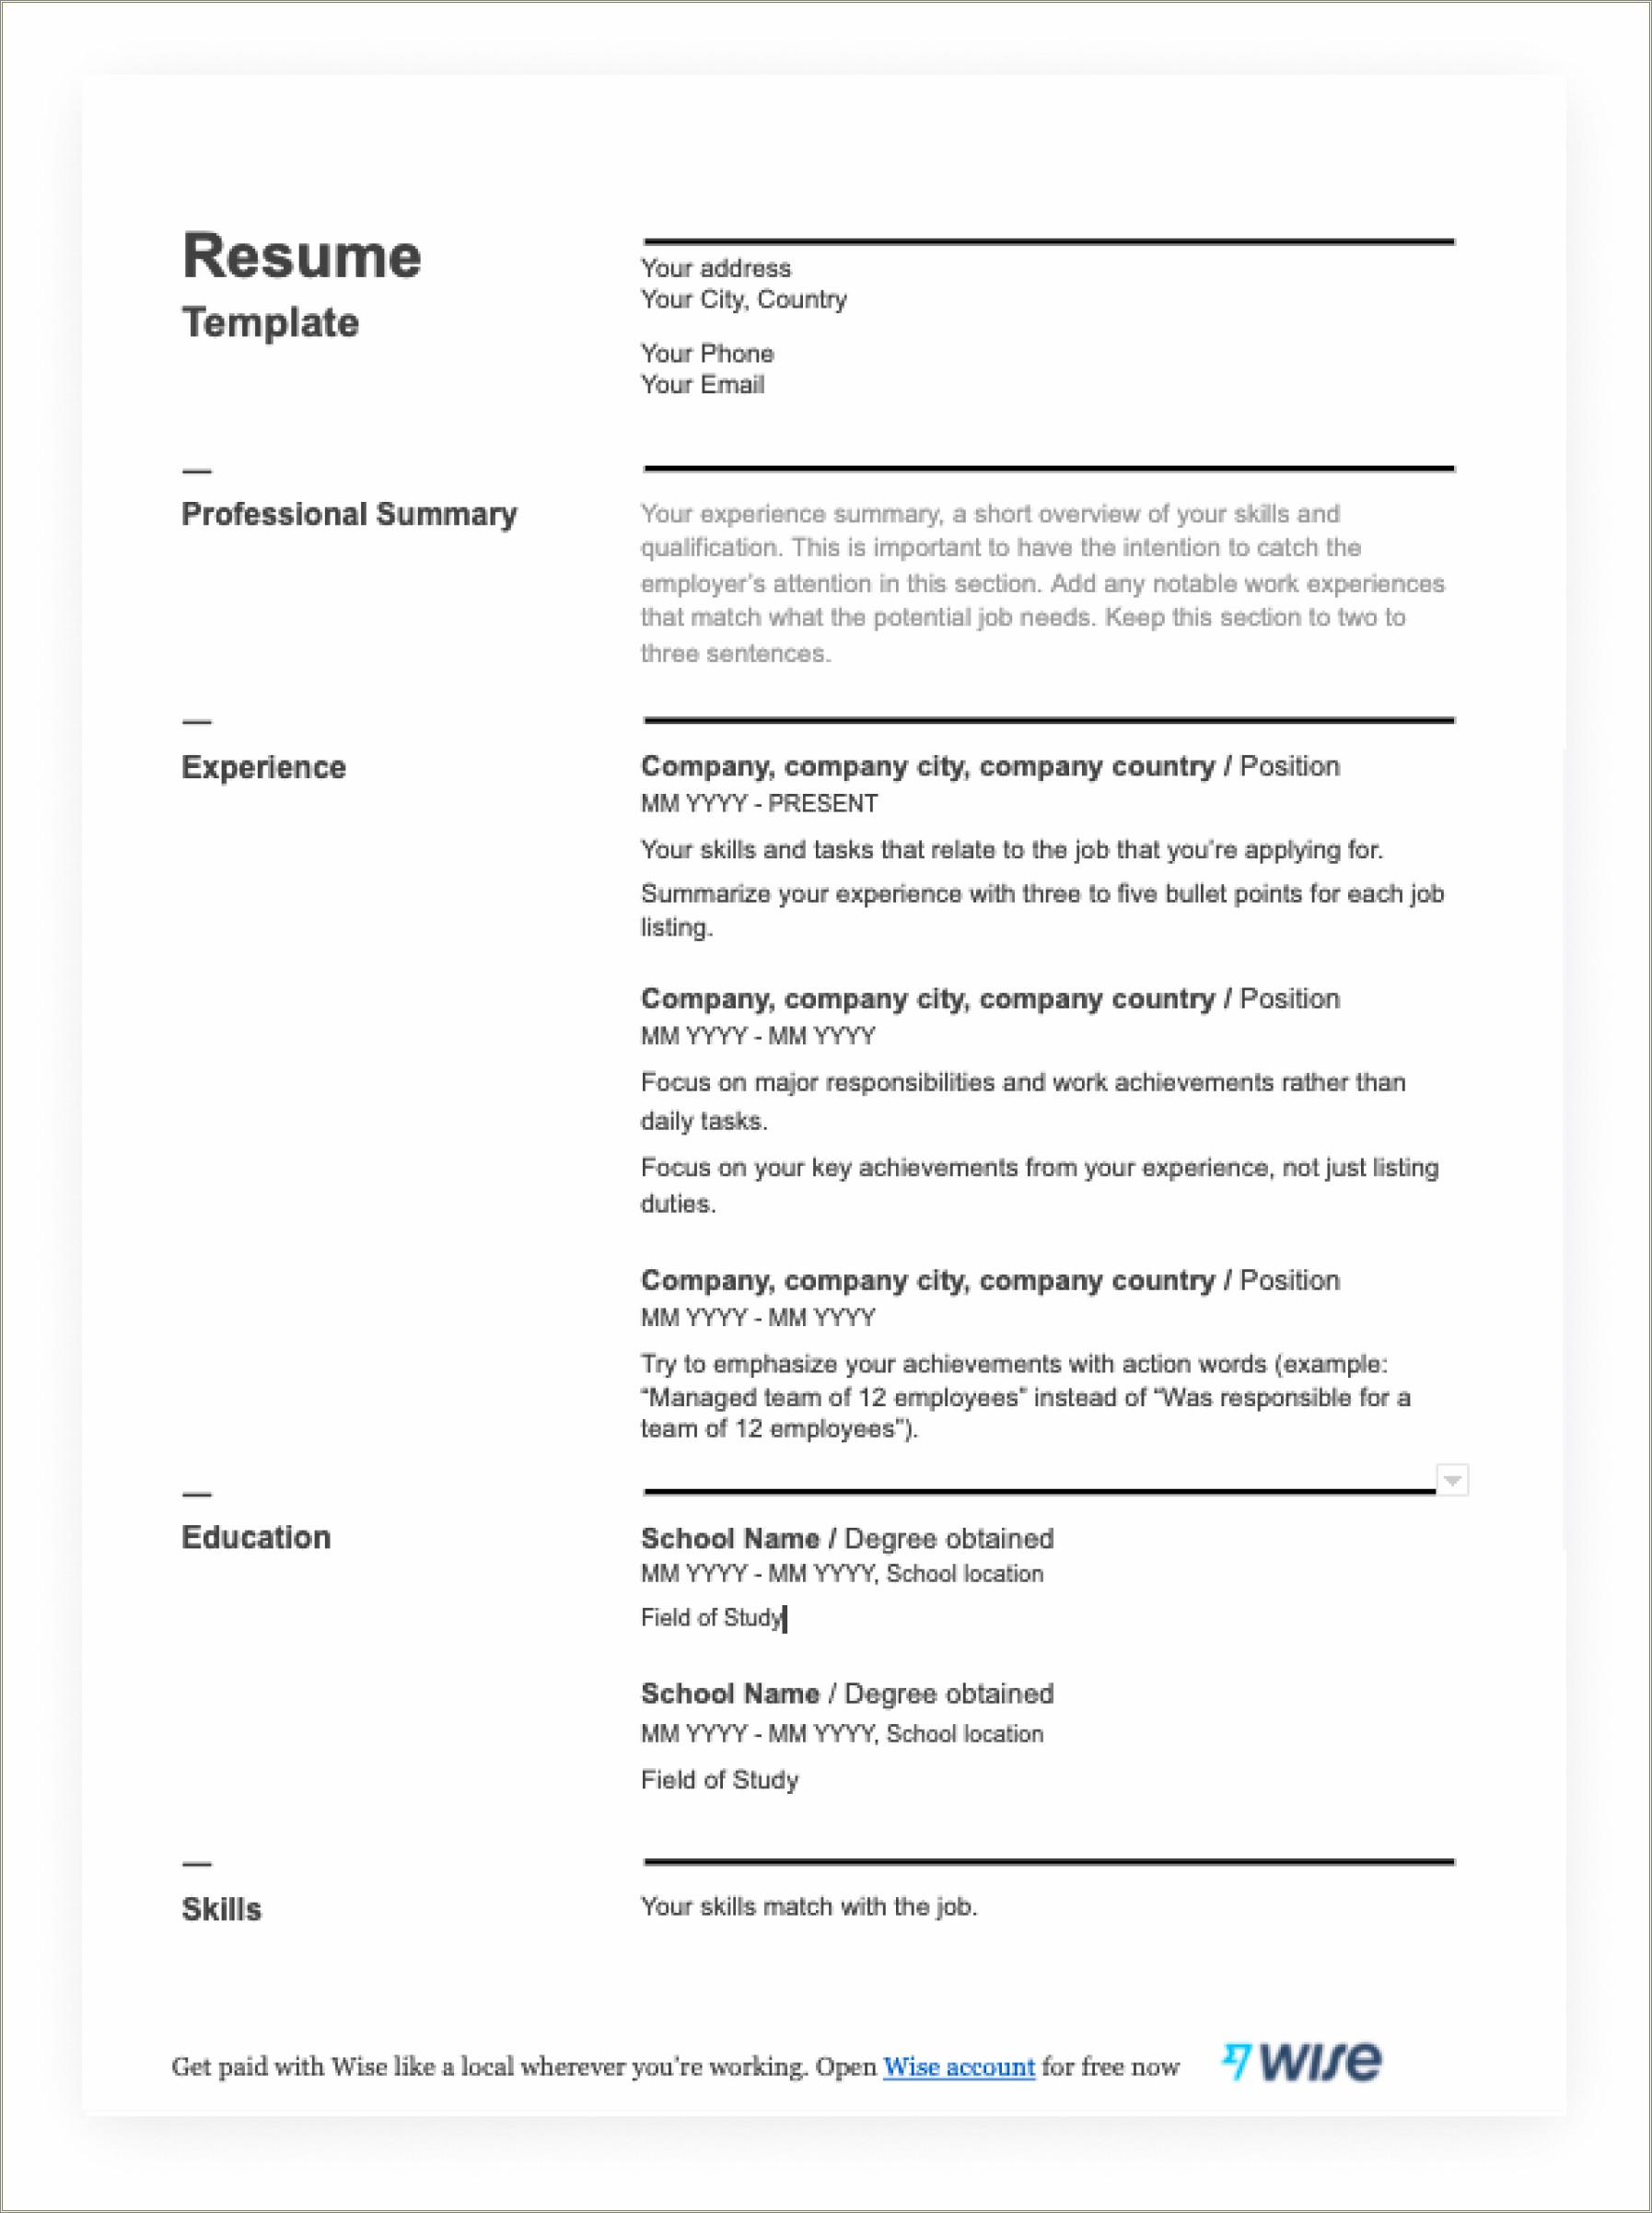 Sample Resume For Experienced Free Download